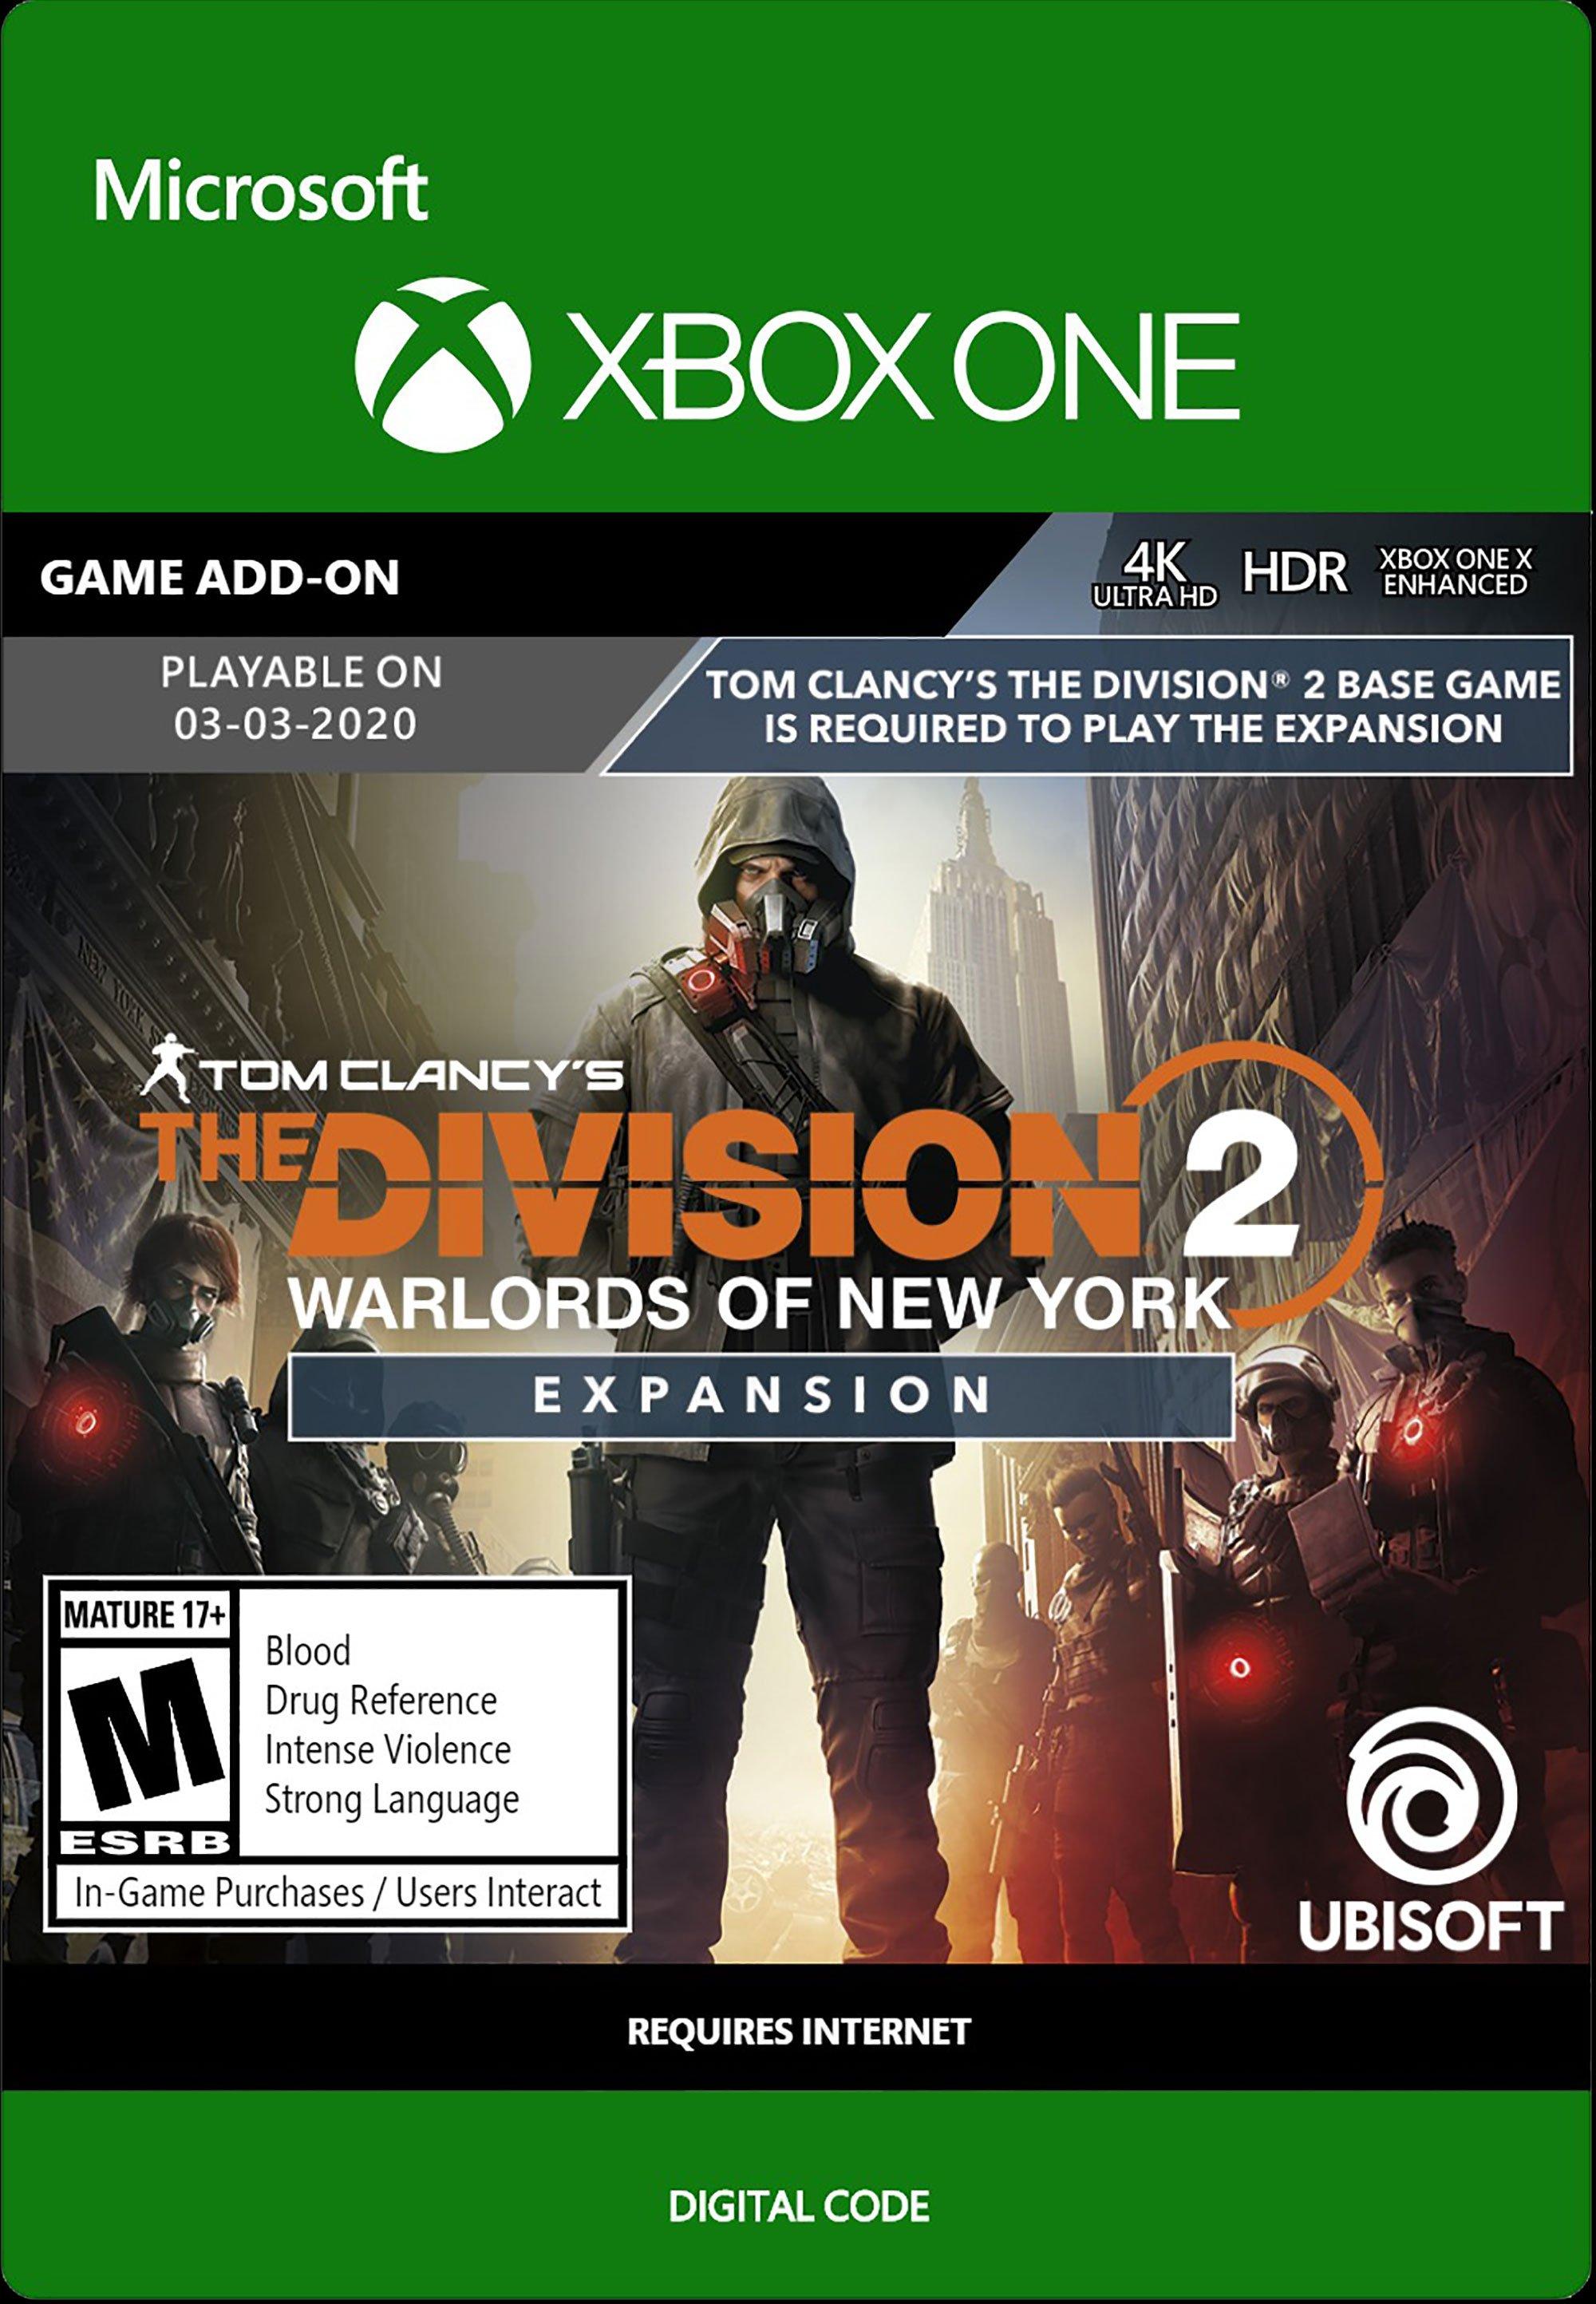 gamestop the division 2 ps4